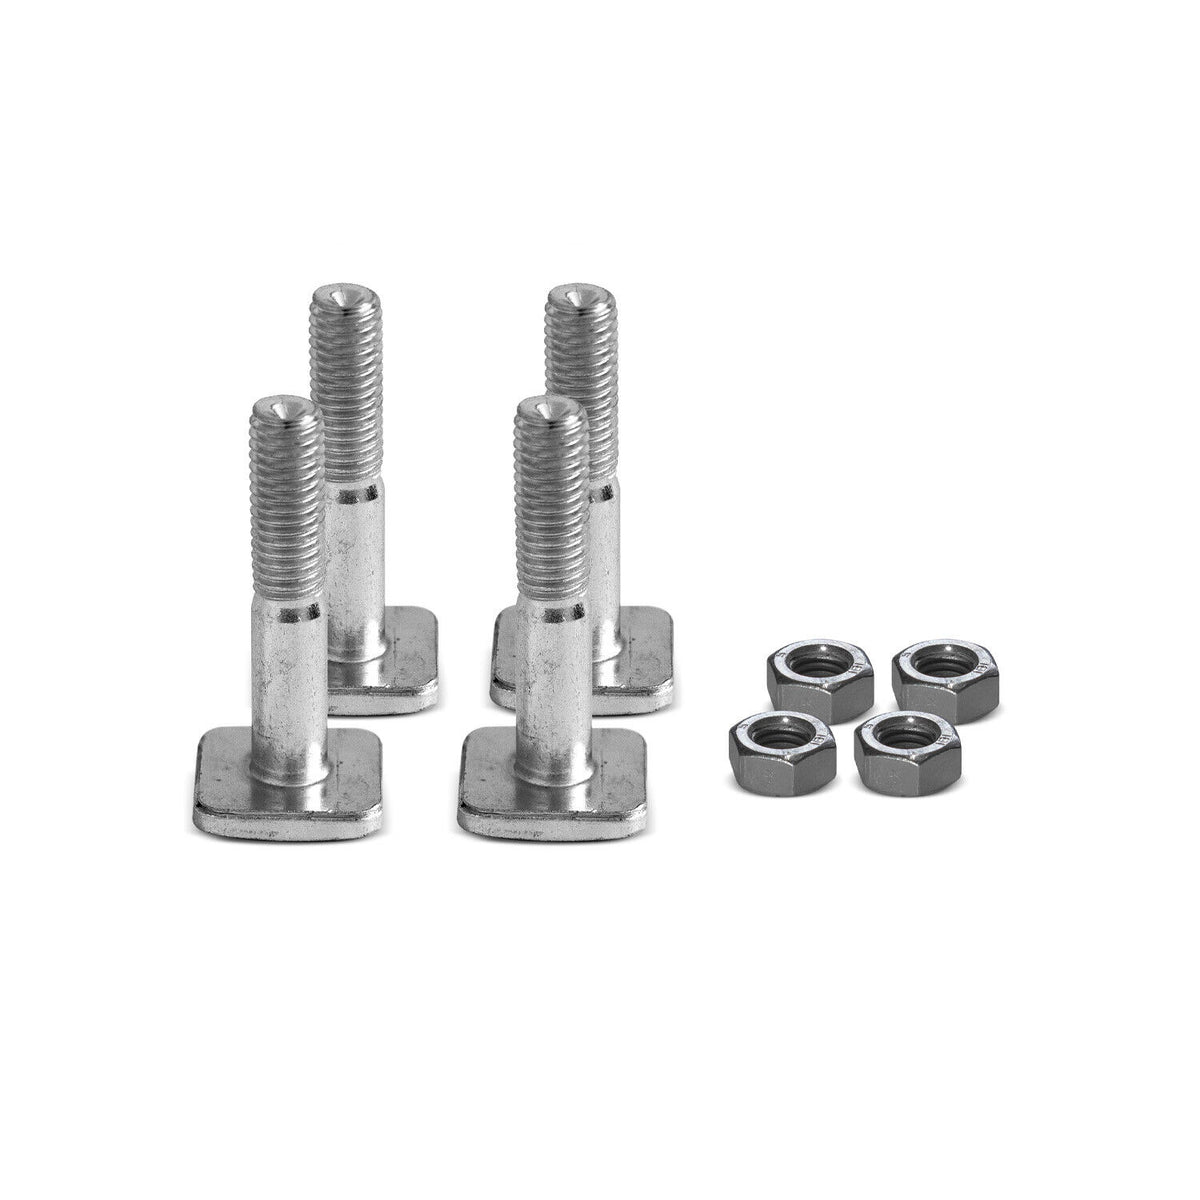 MenaboT-Nut adapter set for roof box Mania 400 460 580 attachment 8x